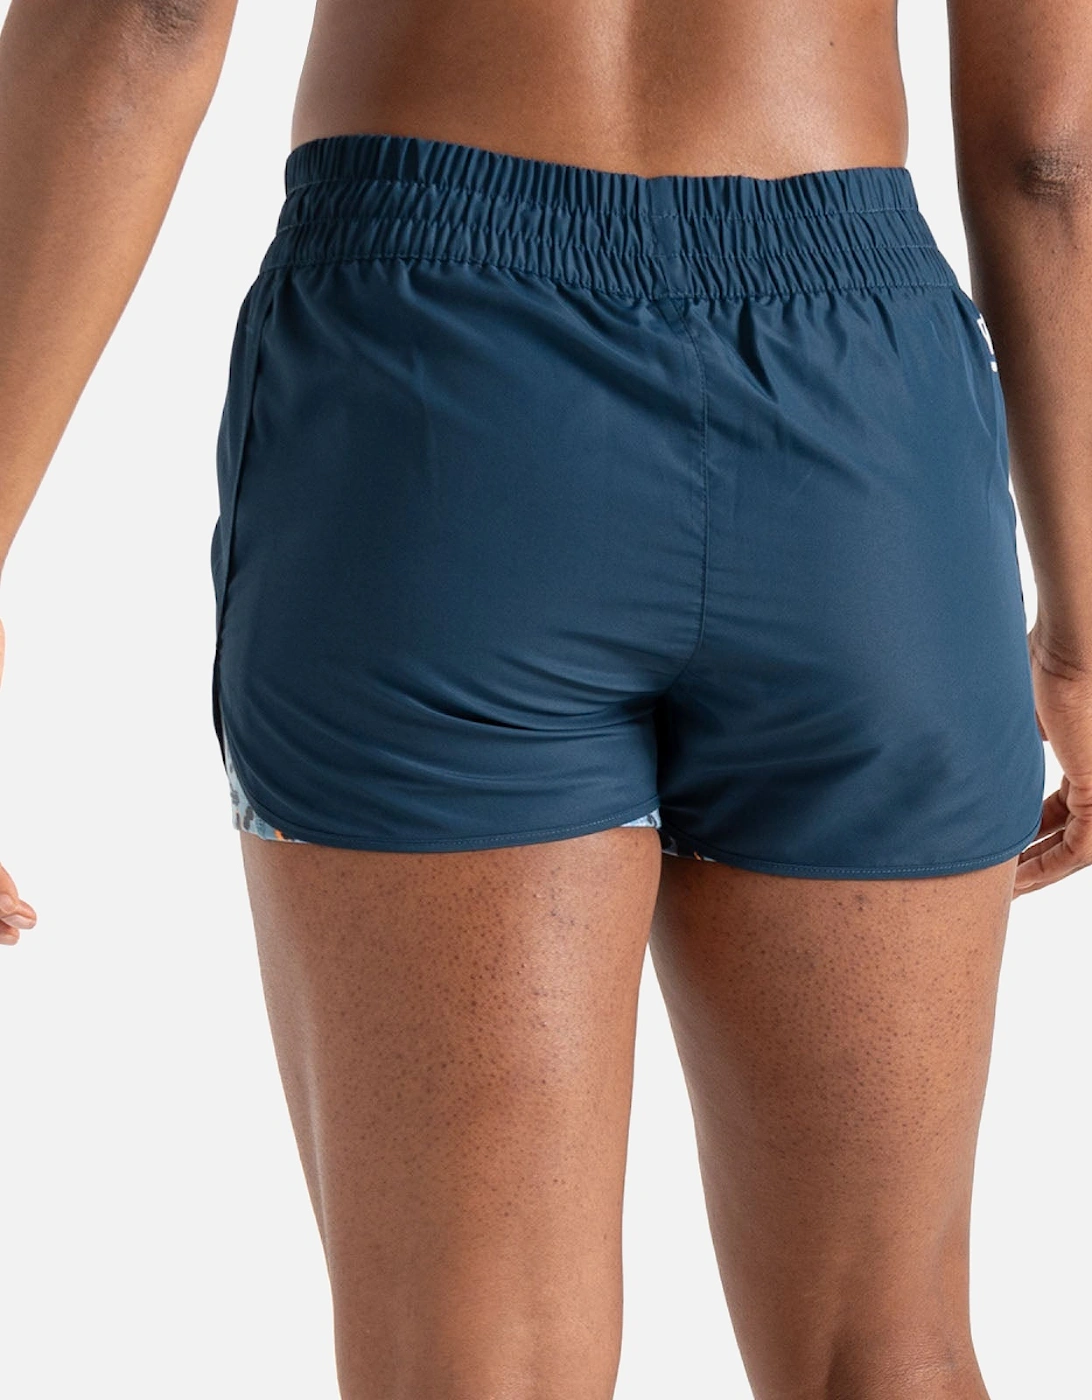 Womens Sprint Up 2 in 1 Quick Dry Sweatwicking Activewear Shorts